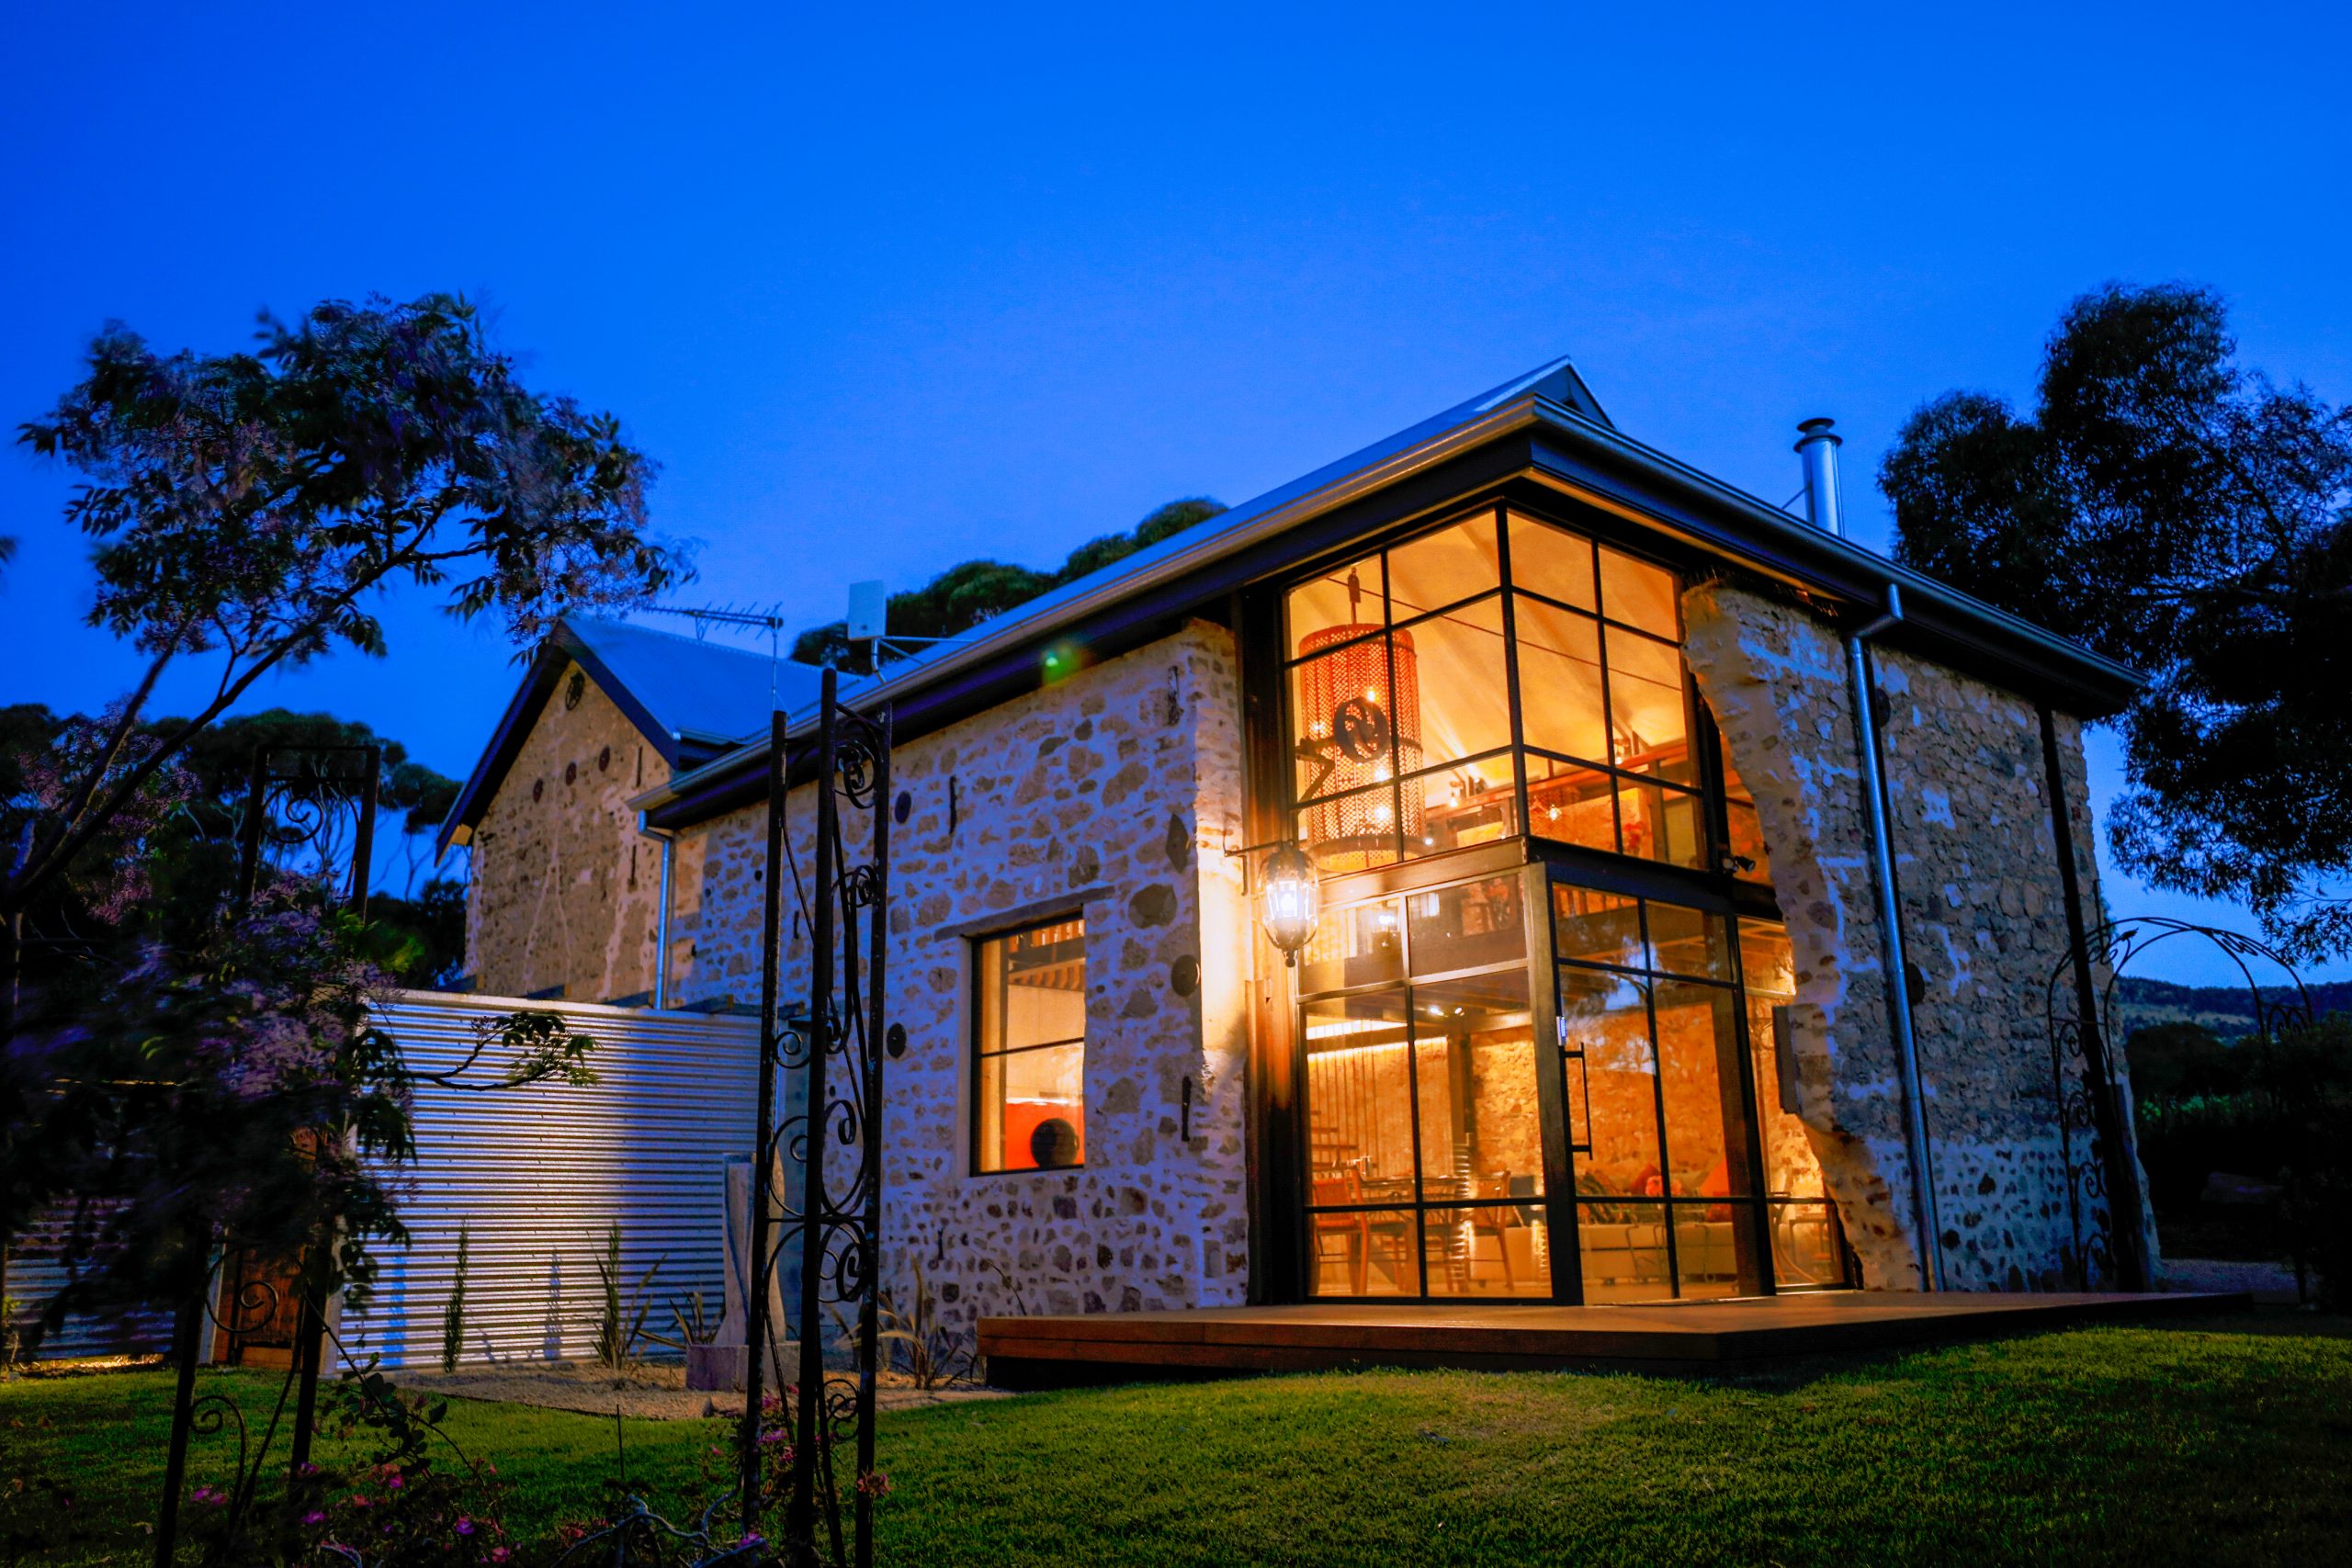 WIN a two night stay at the iconic Old Chaff Mill Retreat thanks to Century 21 South Australia!